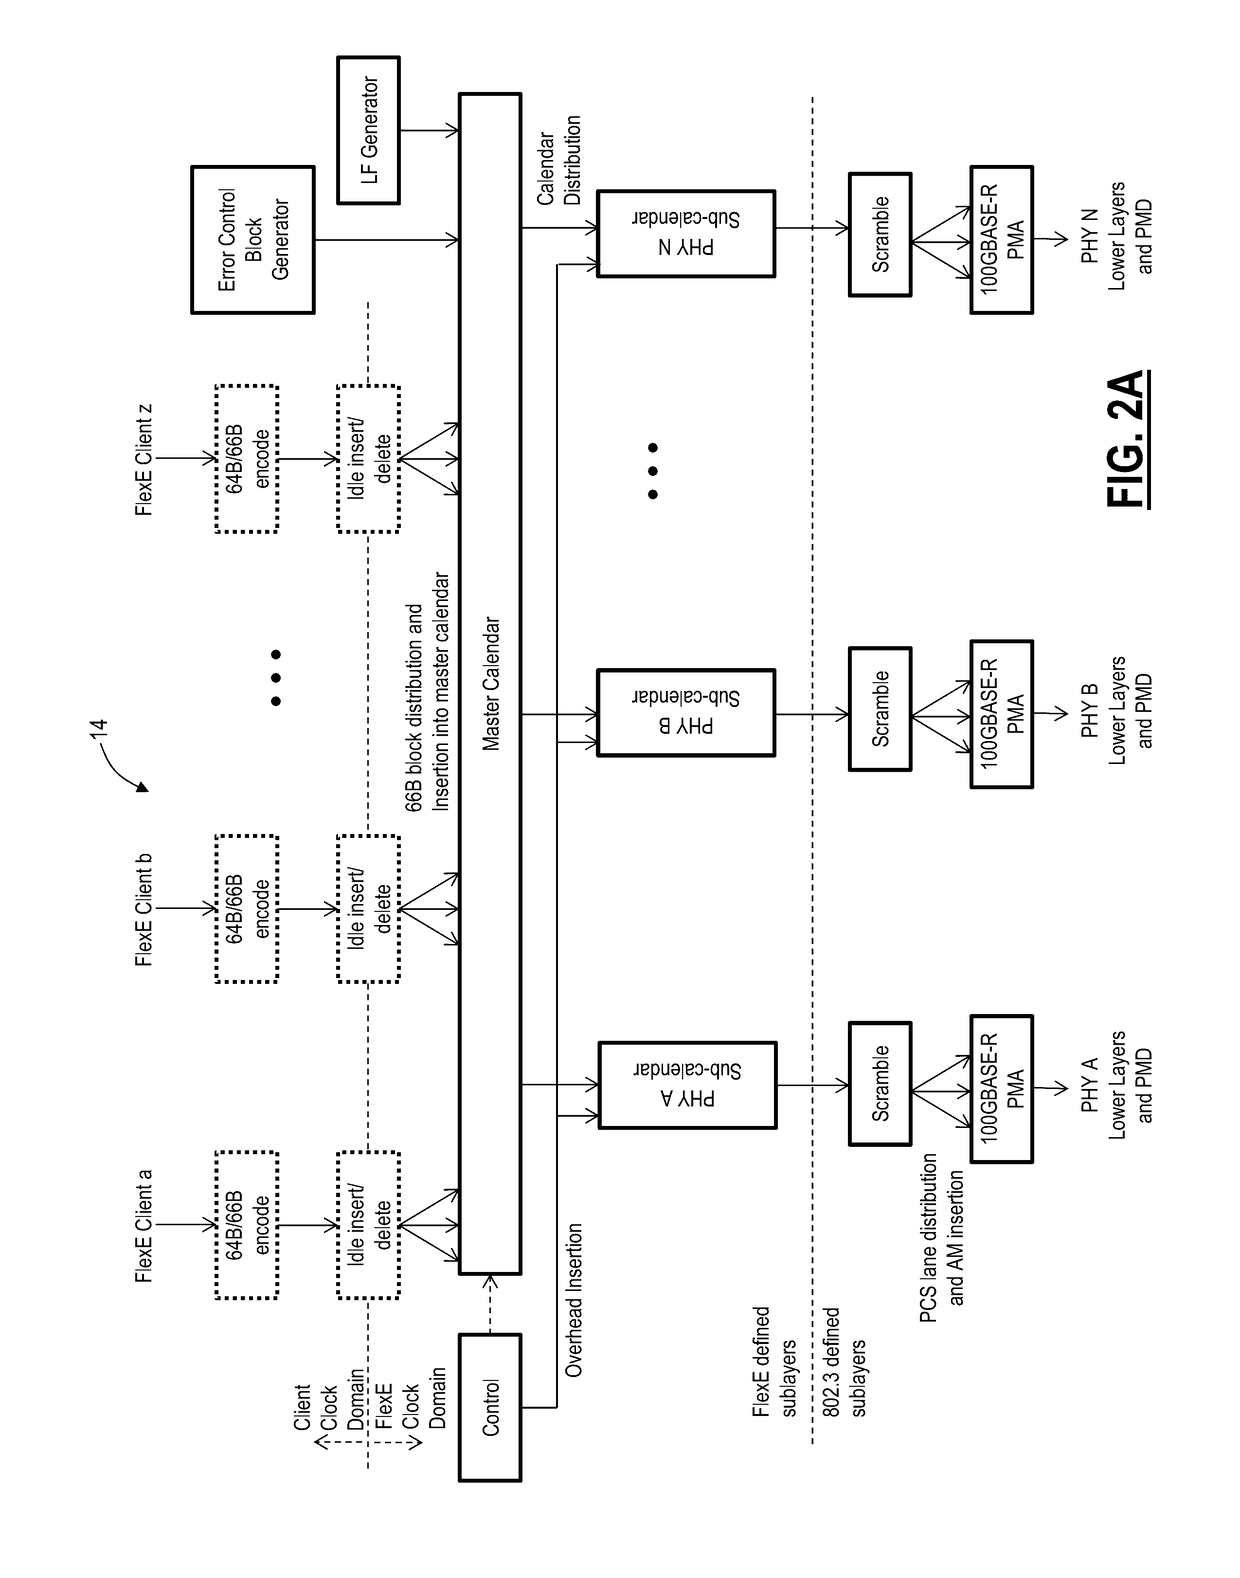 Time transfer systems and methods over flexible ethernet